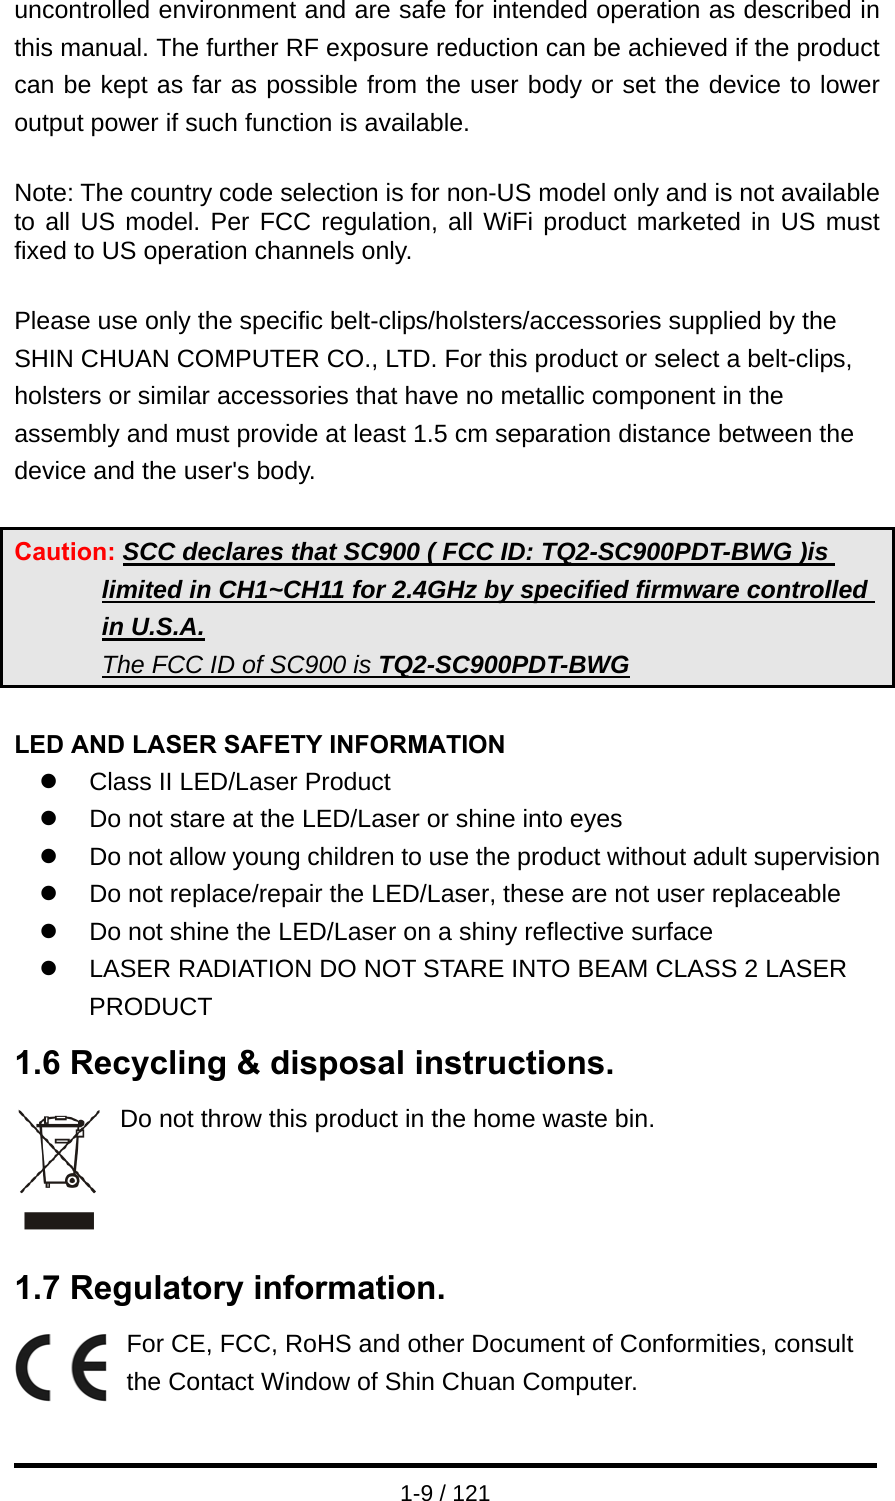  1-9 / 121 uncontrolled environment and are safe for intended operation as described in this manual. The further RF exposure reduction can be achieved if the product can be kept as far as possible from the user body or set the device to lower output power if such function is available.  Note: The country code selection is for non-US model only and is not available to all US model. Per FCC regulation, all WiFi product marketed in US must fixed to US operation channels only.  Please use only the specific belt-clips/holsters/accessories supplied by the SHIN CHUAN COMPUTER CO., LTD. For this product or select a belt-clips, holsters or similar accessories that have no metallic component in the assembly and must provide at least 1.5 cm separation distance between the device and the user&apos;s body.  Caution: SCC declares that SC900 ( FCC ID: TQ2-SC900PDT-BWG )is limited in CH1~CH11 for 2.4GHz by specified firmware controlled in U.S.A. The FCC ID of SC900 is TQ2-SC900PDT-BWG  LED AND LASER SAFETY INFORMATION z  Class II LED/Laser Product z  Do not stare at the LED/Laser or shine into eyes z  Do not allow young children to use the product without adult supervision z  Do not replace/repair the LED/Laser, these are not user replaceable z  Do not shine the LED/Laser on a shiny reflective surface z  LASER RADIATION DO NOT STARE INTO BEAM CLASS 2 LASER PRODUCT 1.6 Recycling &amp; disposal instructions. Do not throw this product in the home waste bin.      1.7 Regulatory information. For CE, FCC, RoHS and other Document of Conformities, consult the Contact Window of Shin Chuan Computer.  